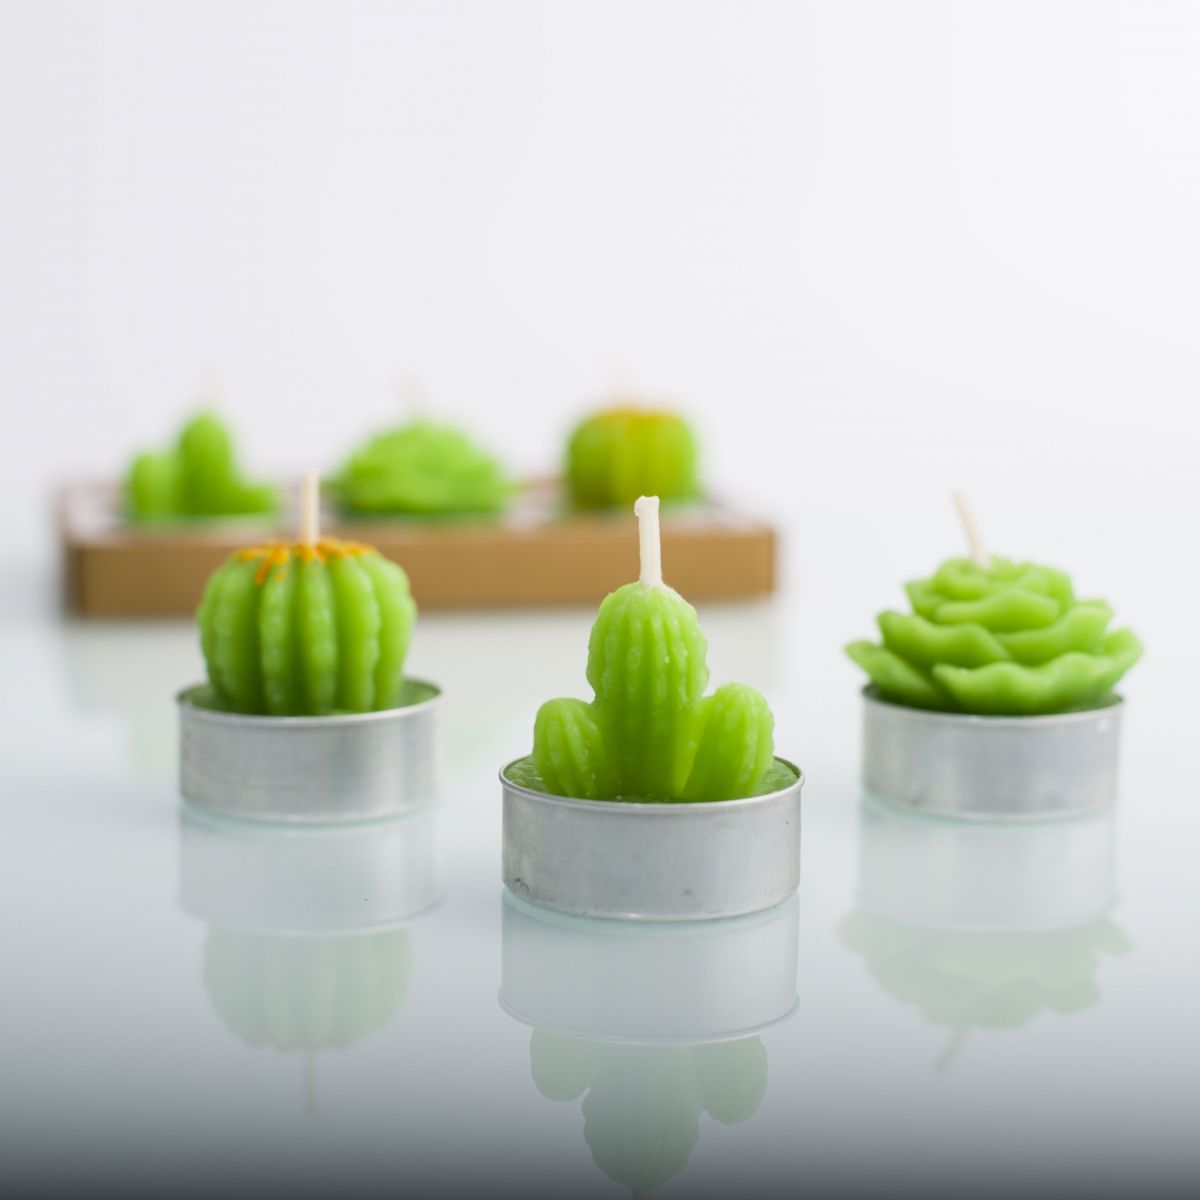 Tea Light Candles ：Green Colour ,Cactus Shape ,Beeswax ,Aluminum Shell ,Display Box ,China Factory ,Best Price-HOWCANDLE-Candles,Scented Candles,Aromatherapy Candles,Soy Candles,Vegan Candles,Jar Candles,Pillar Candles,Candle Gift Sets,Essential Oils,Reed Diffuser,Candle Holder,